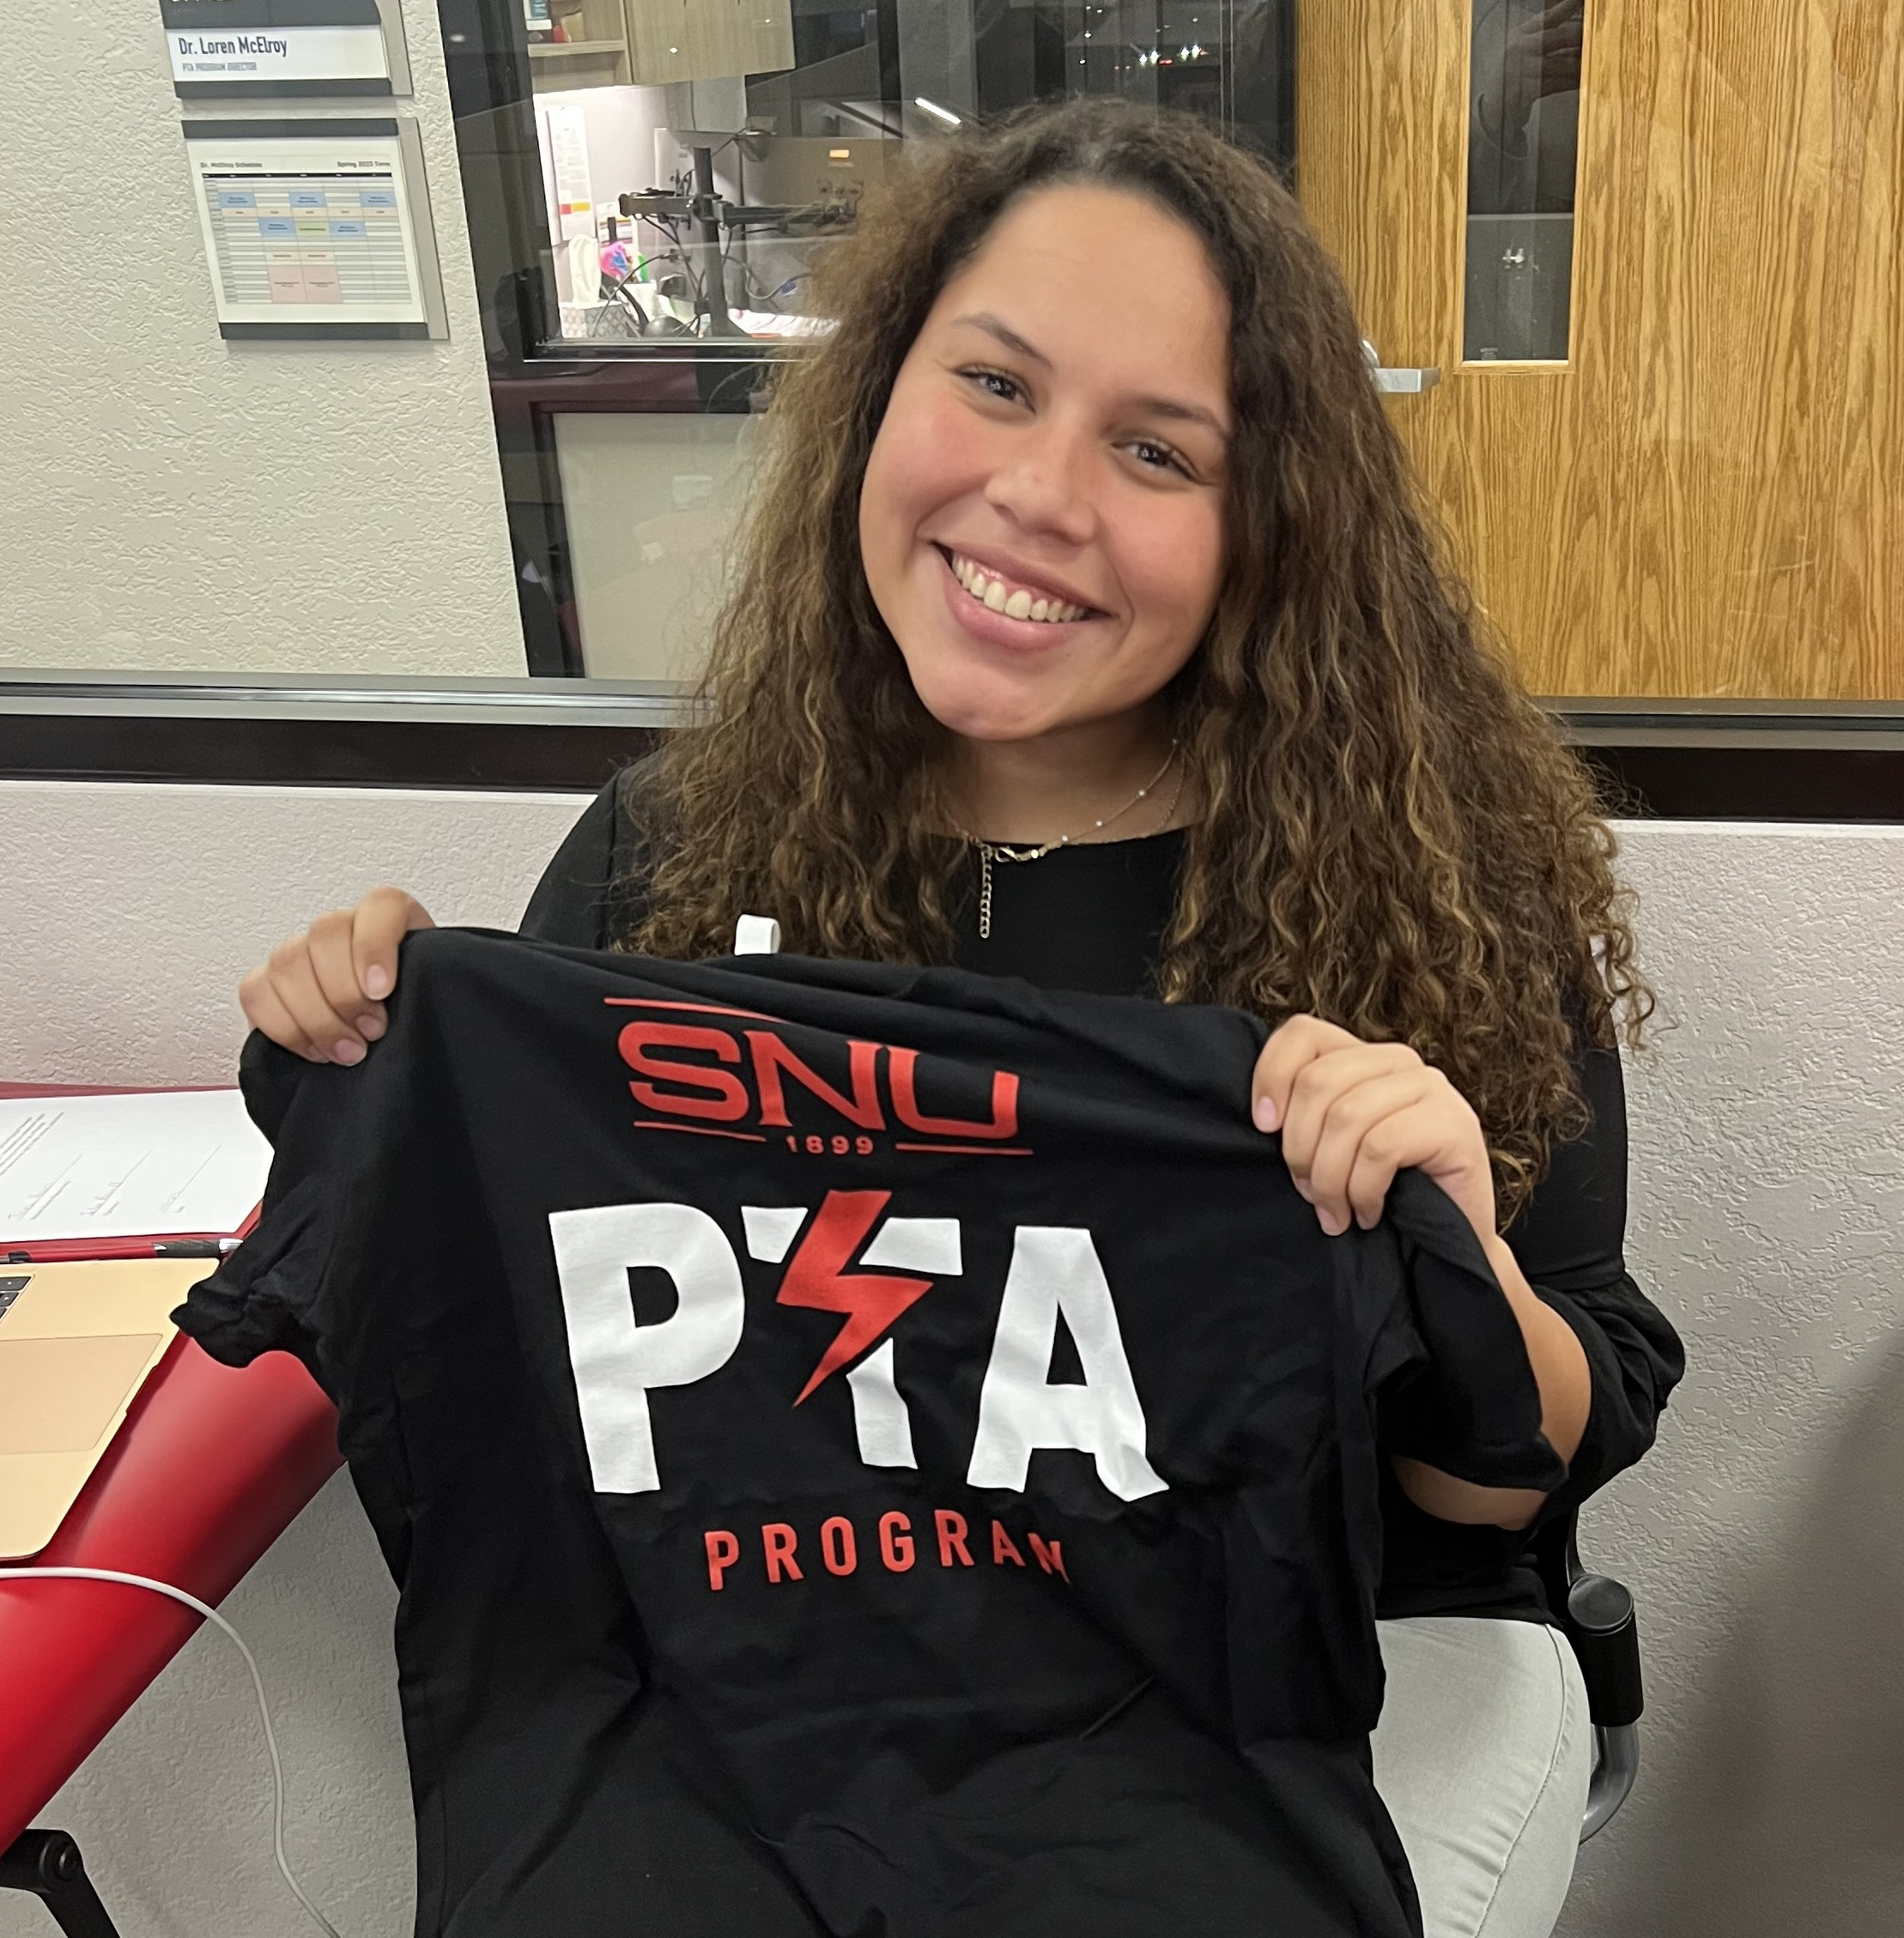 Talea Powell: Navigating Dreams and Making a Difference in SNU’s PTA Program